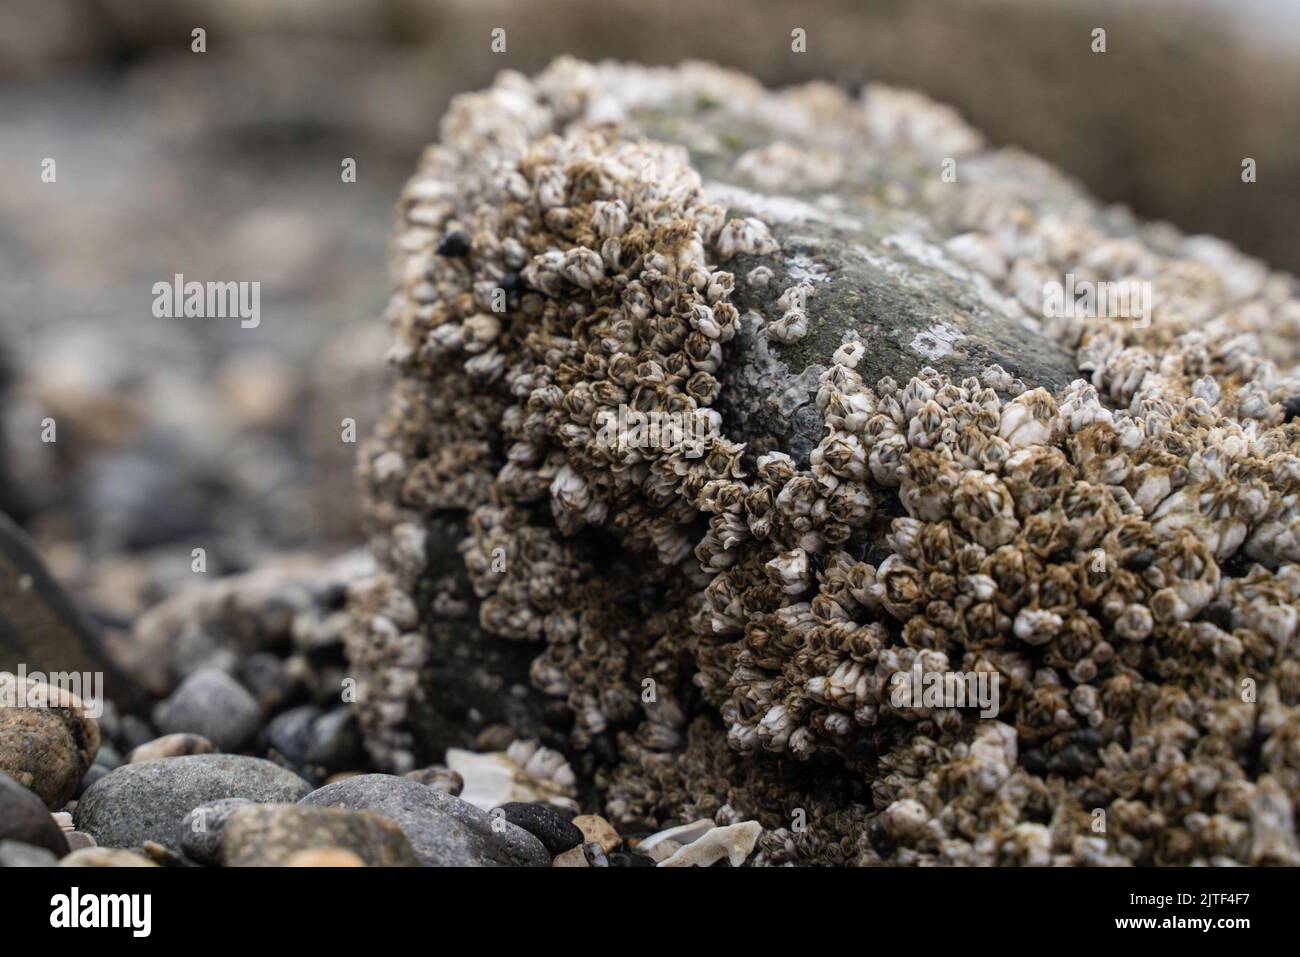 coastal sea growth will close-up details of barnacles lichen Stock Photo